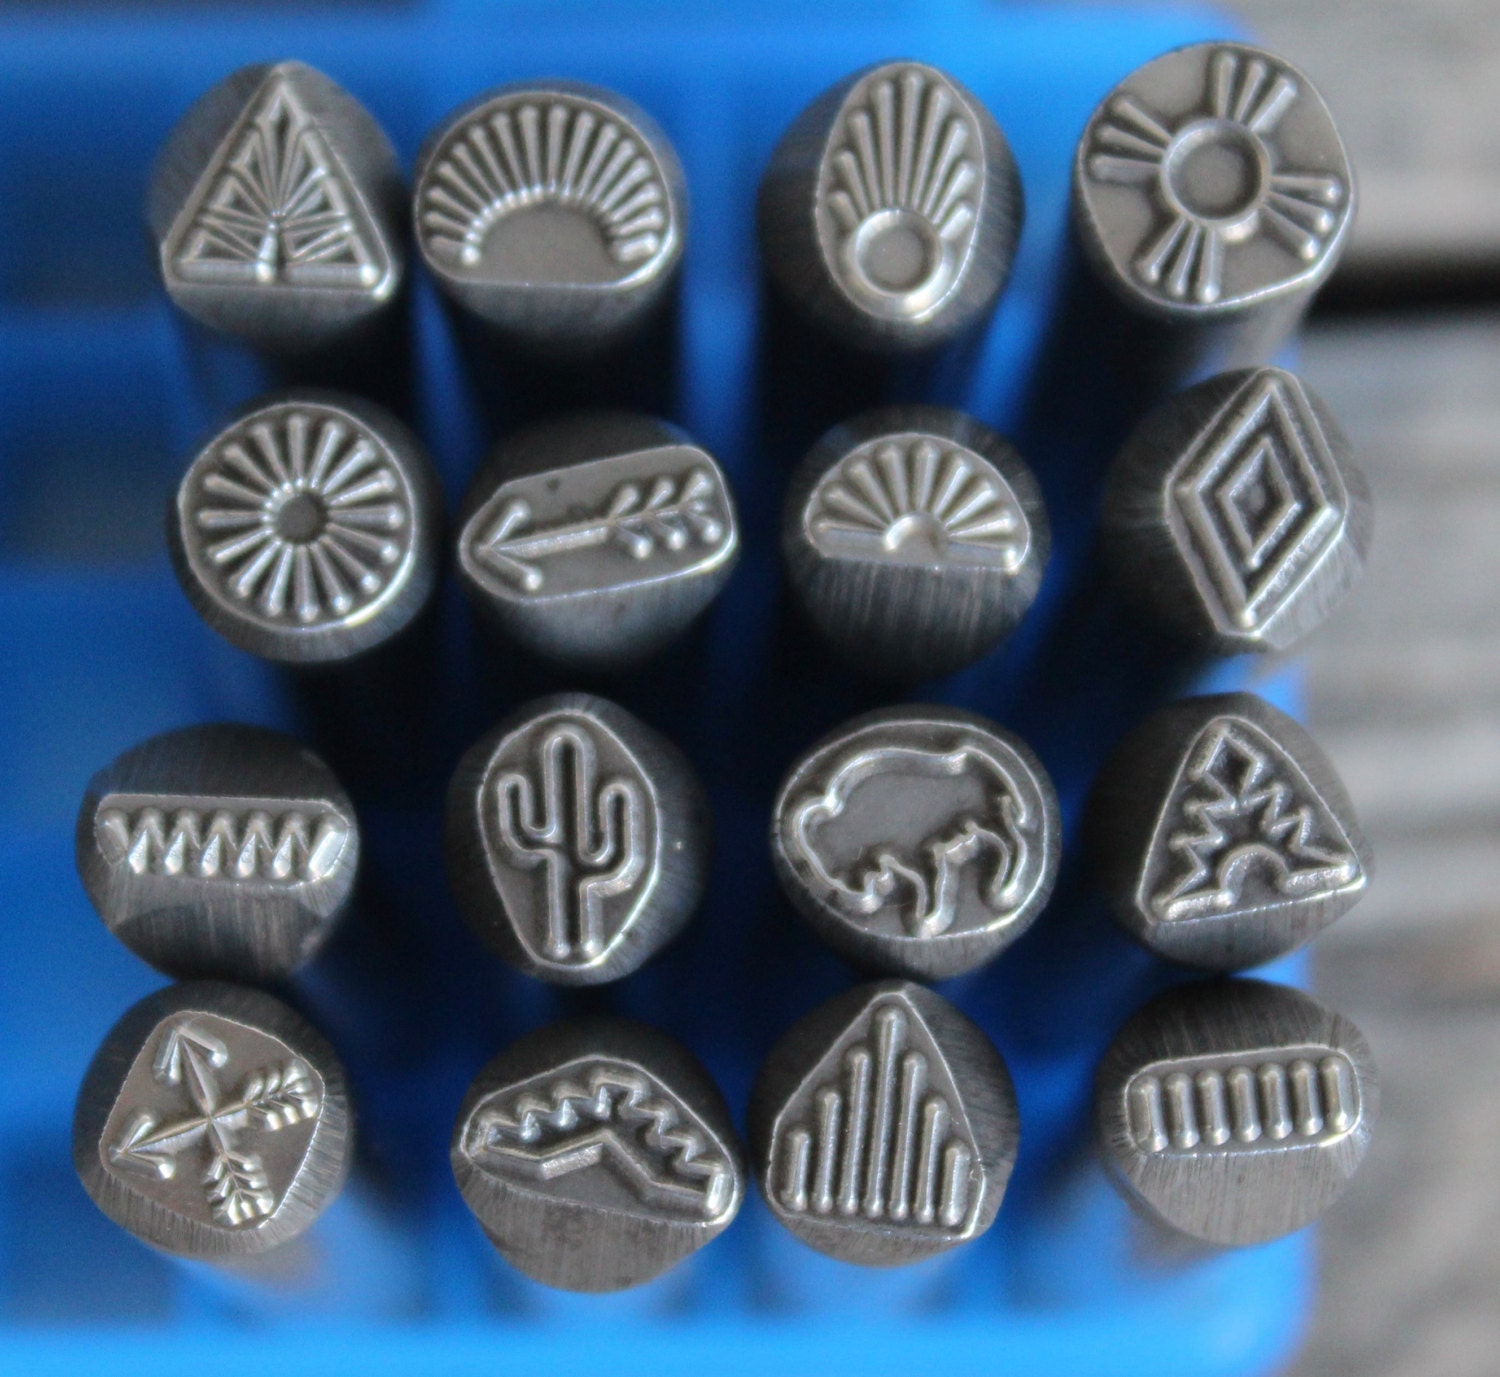 What are most common metal stamping tools in 2021?